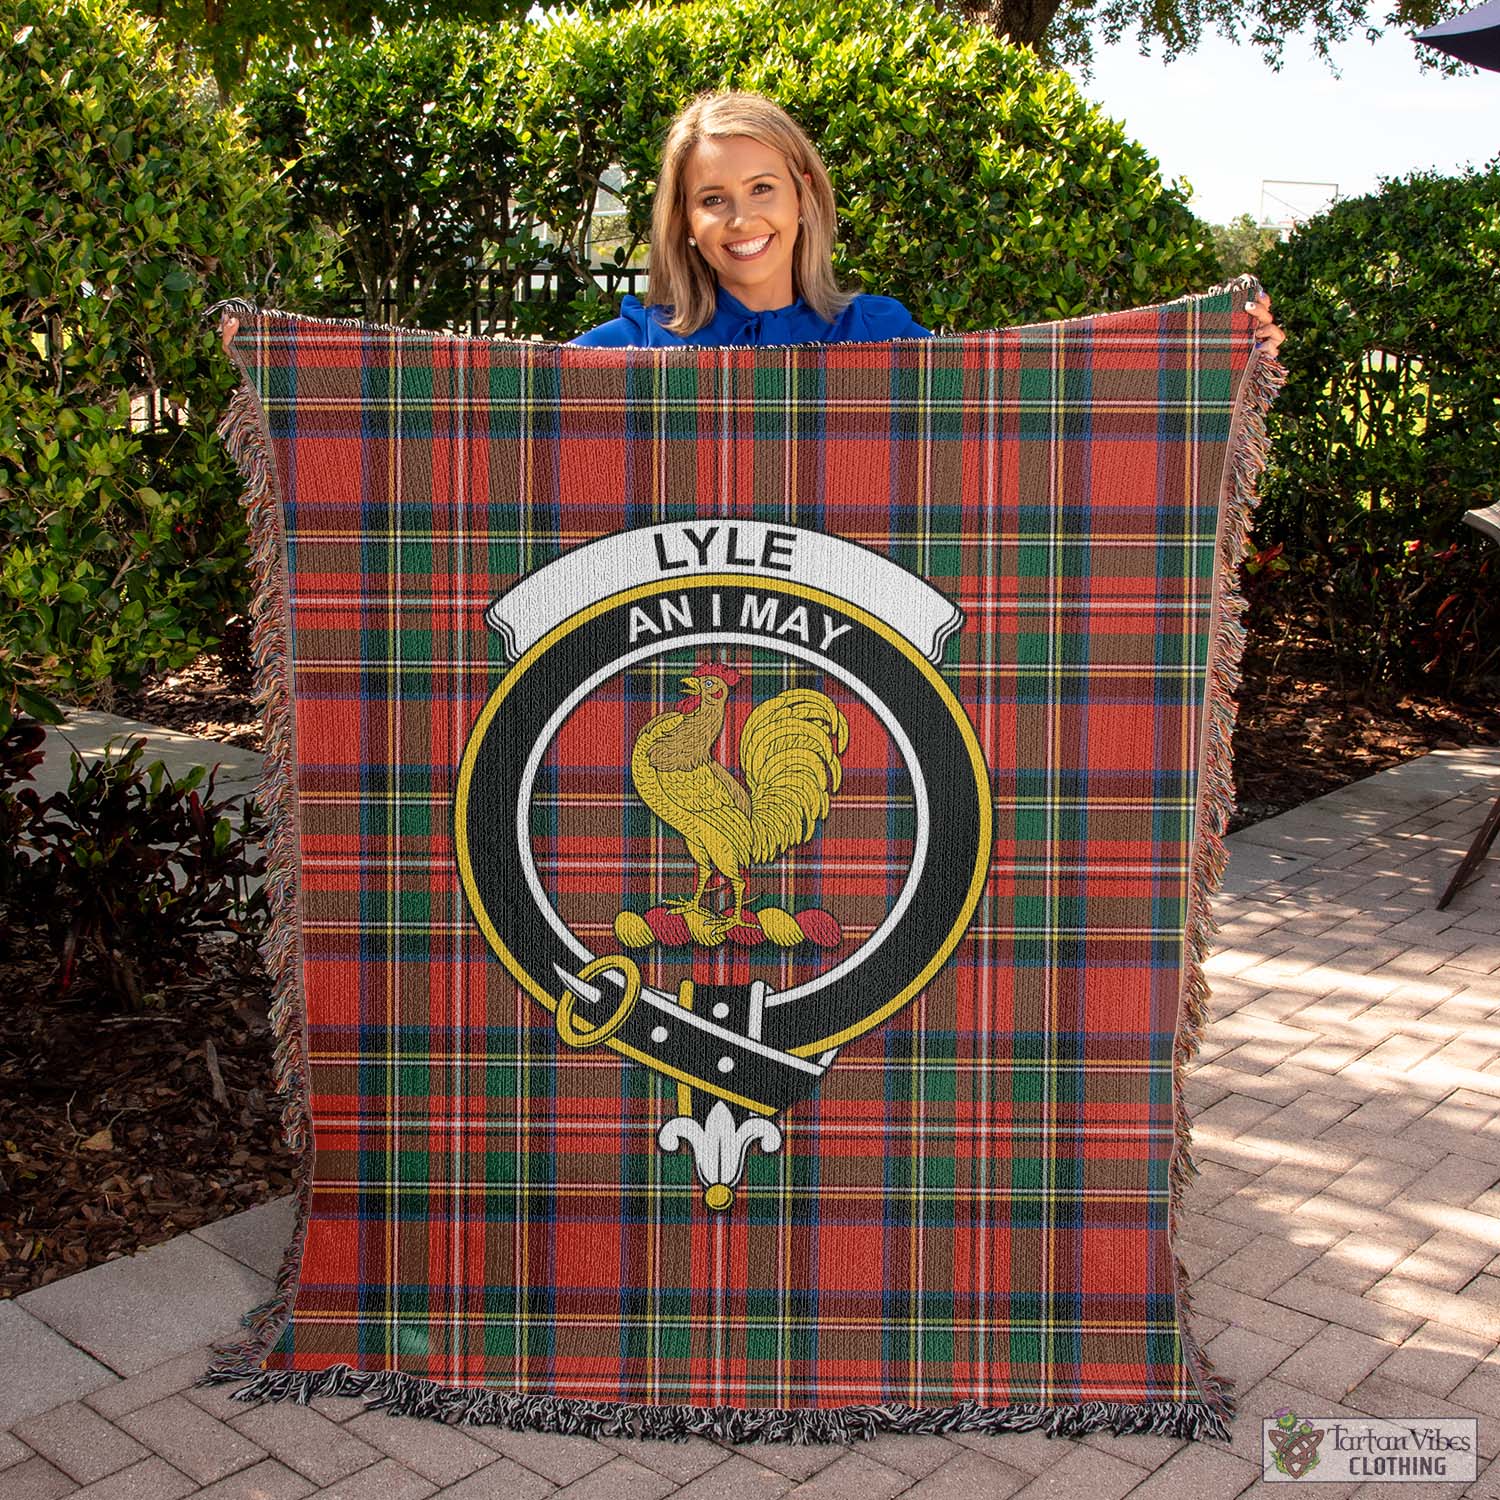 Tartan Vibes Clothing Lyle Tartan Woven Blanket with Family Crest